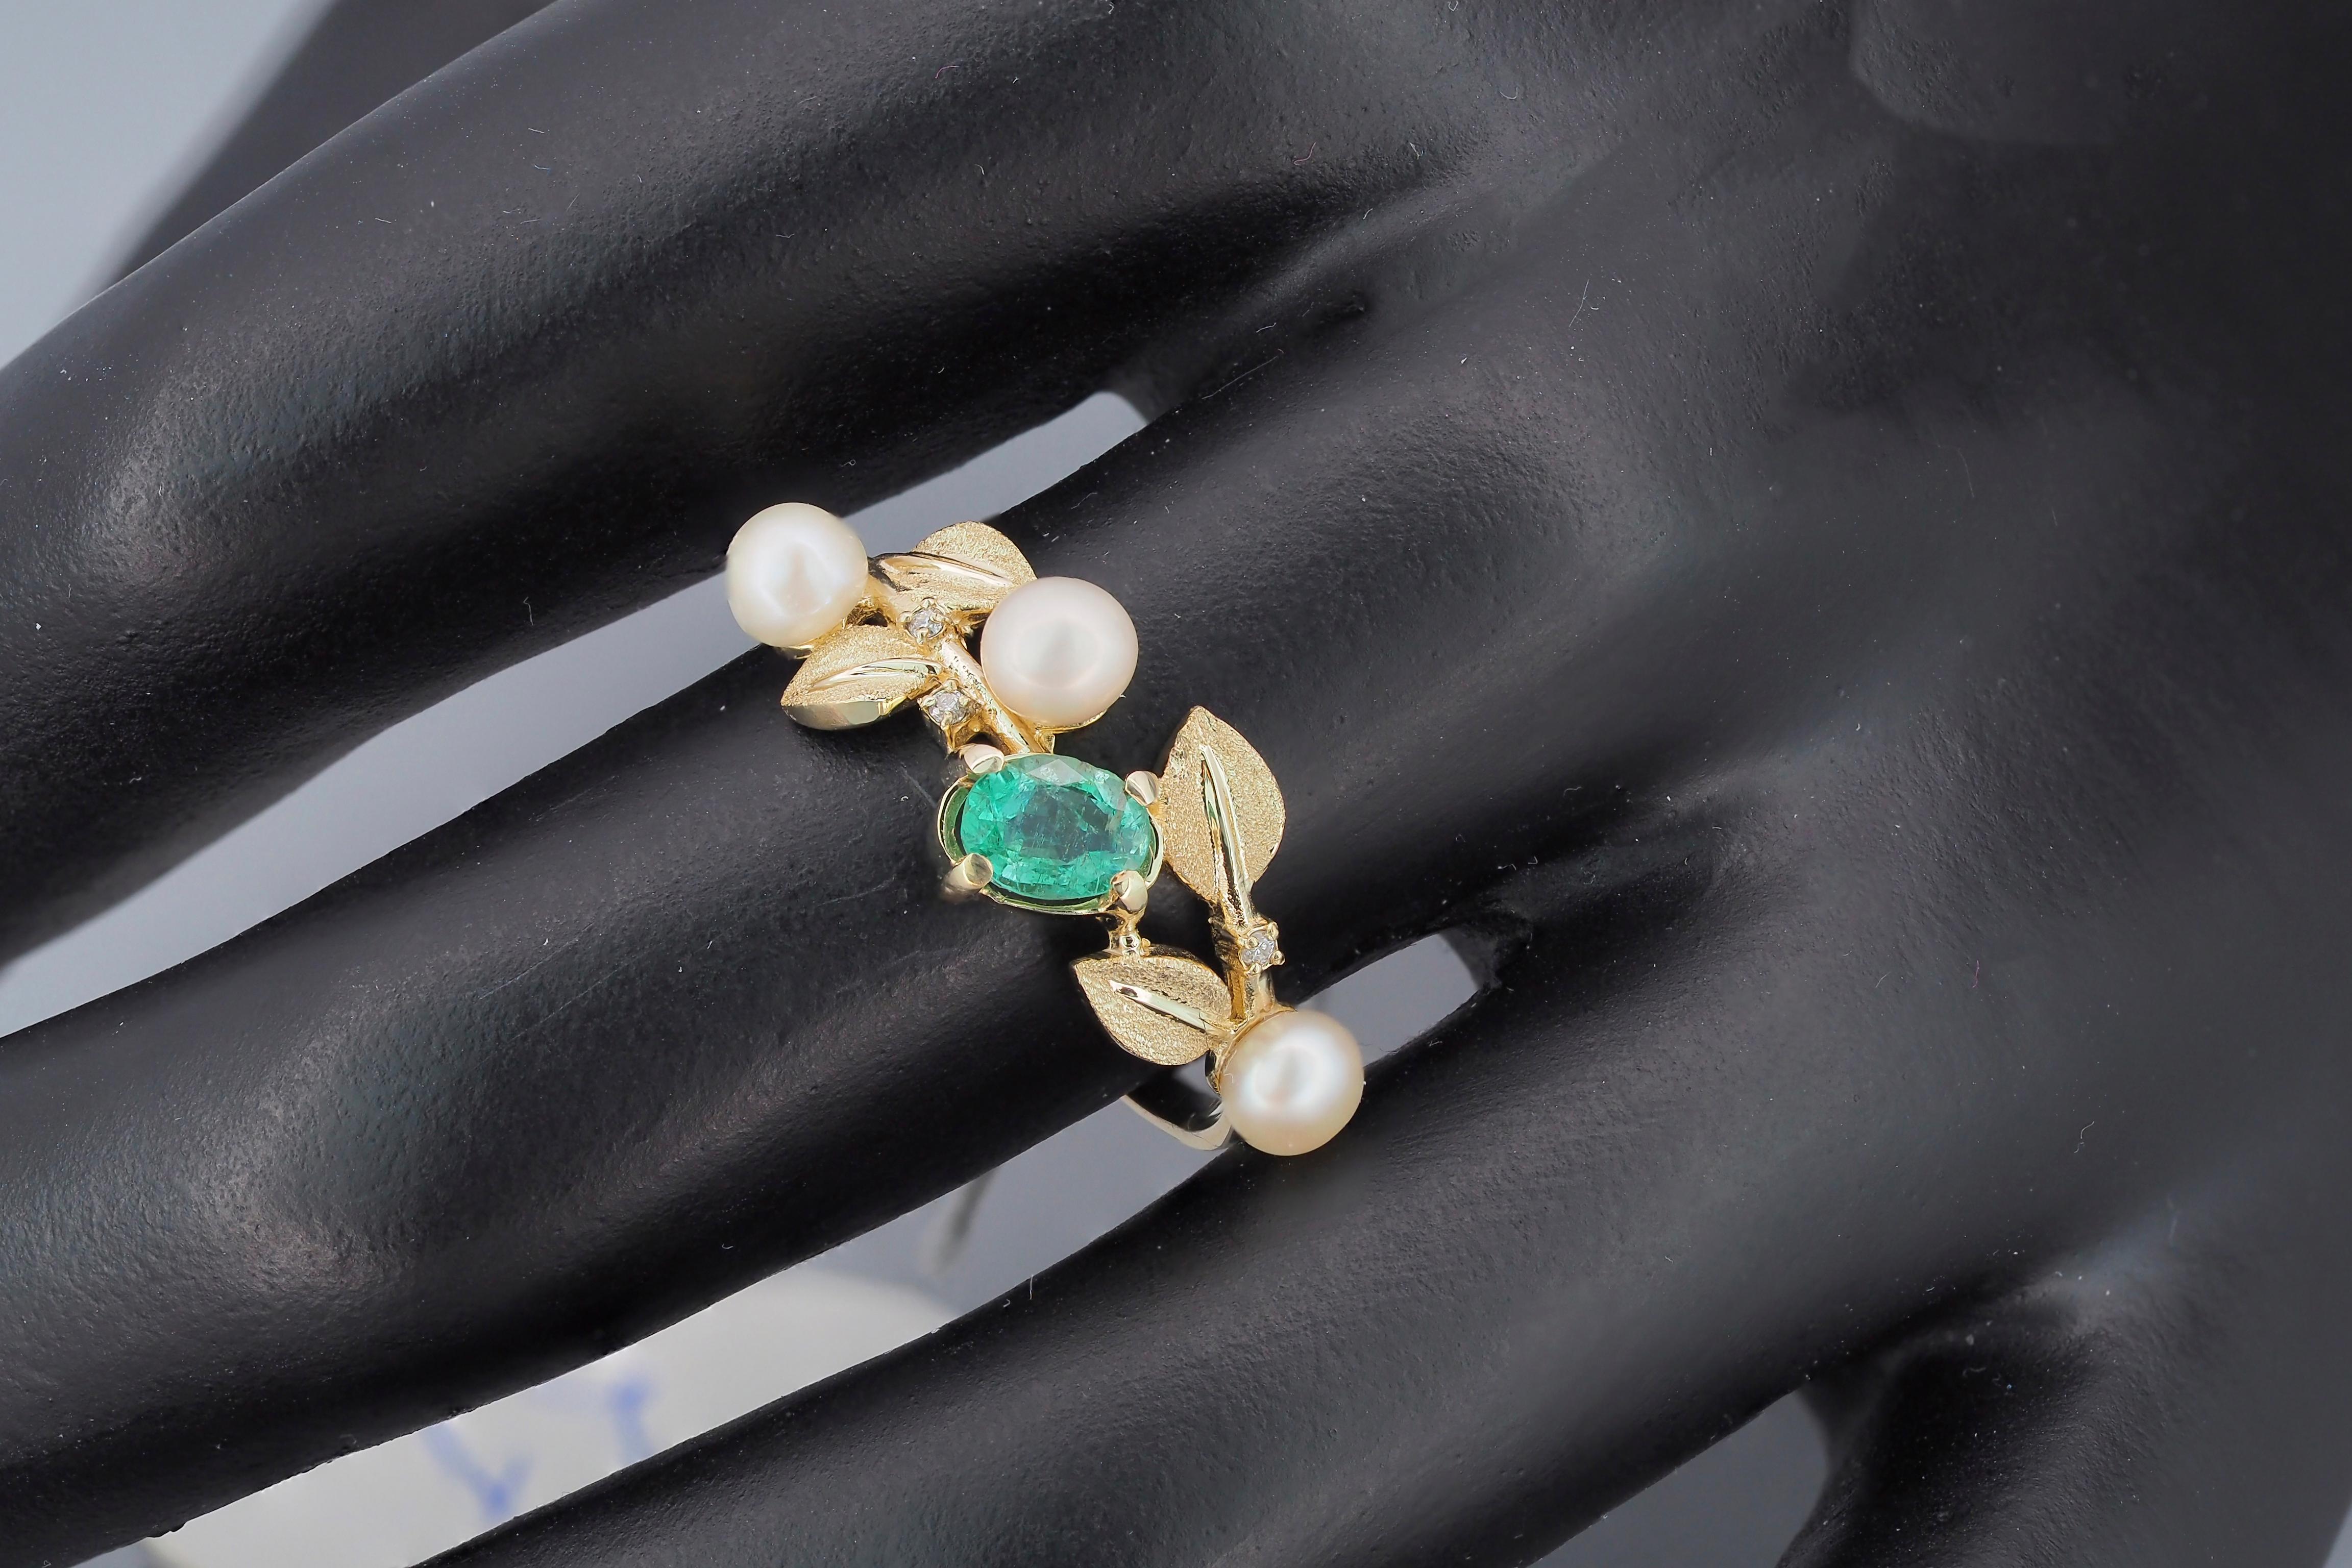 14k Gold Ring with Emerald, Pearls and Diamonds 2